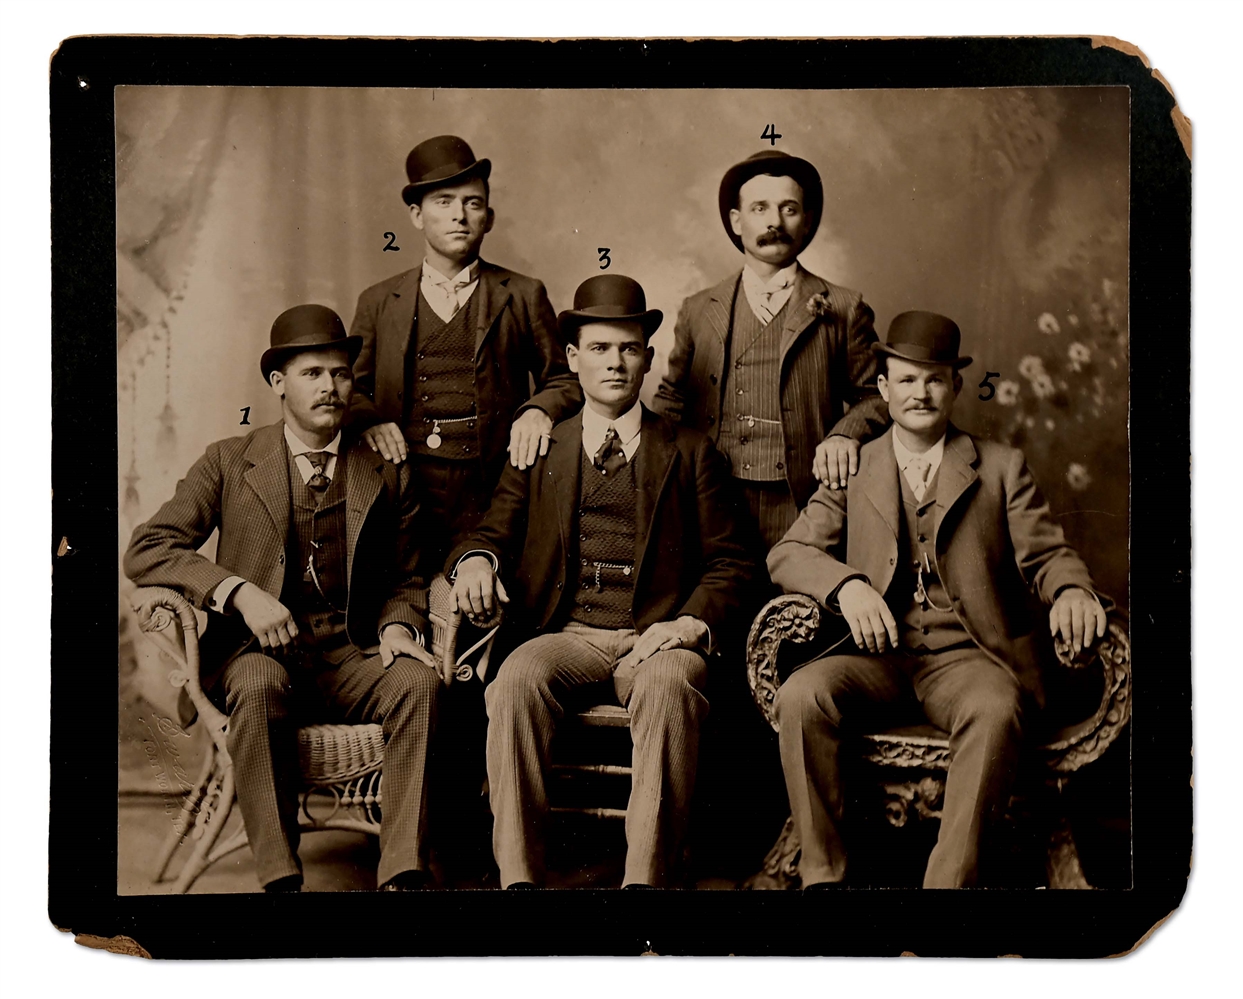 "THE WILD BUNCH / THE FORT WORTH FIVE" PHOTOGRAPH 